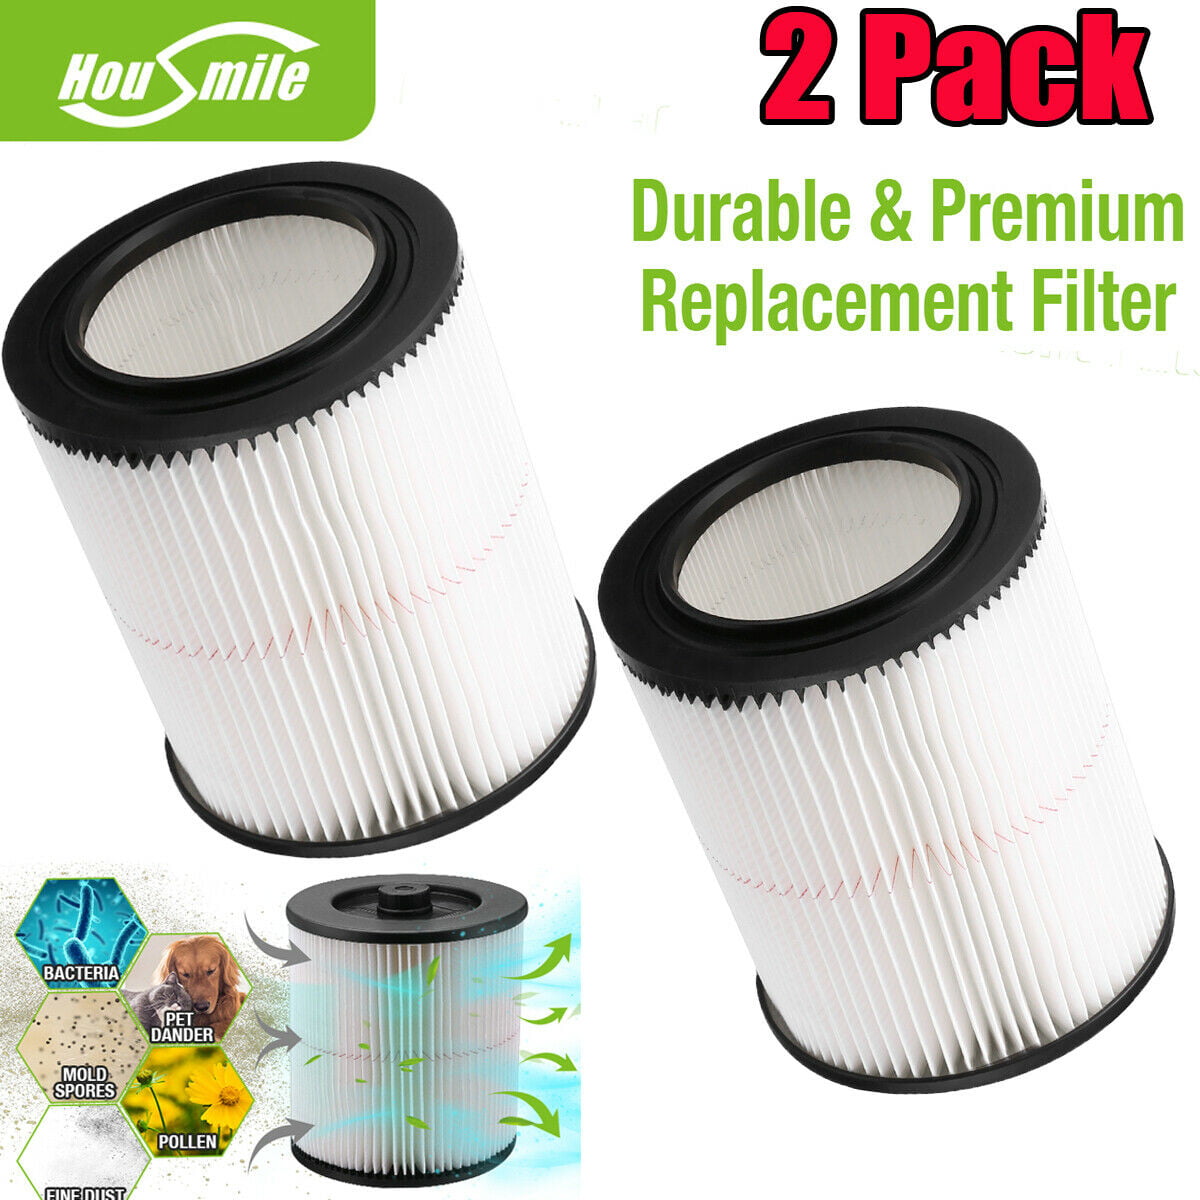 Replacement Cartridge Filter for Shop Vac Craftsman 9-17816 Wet Dry Air Filter 